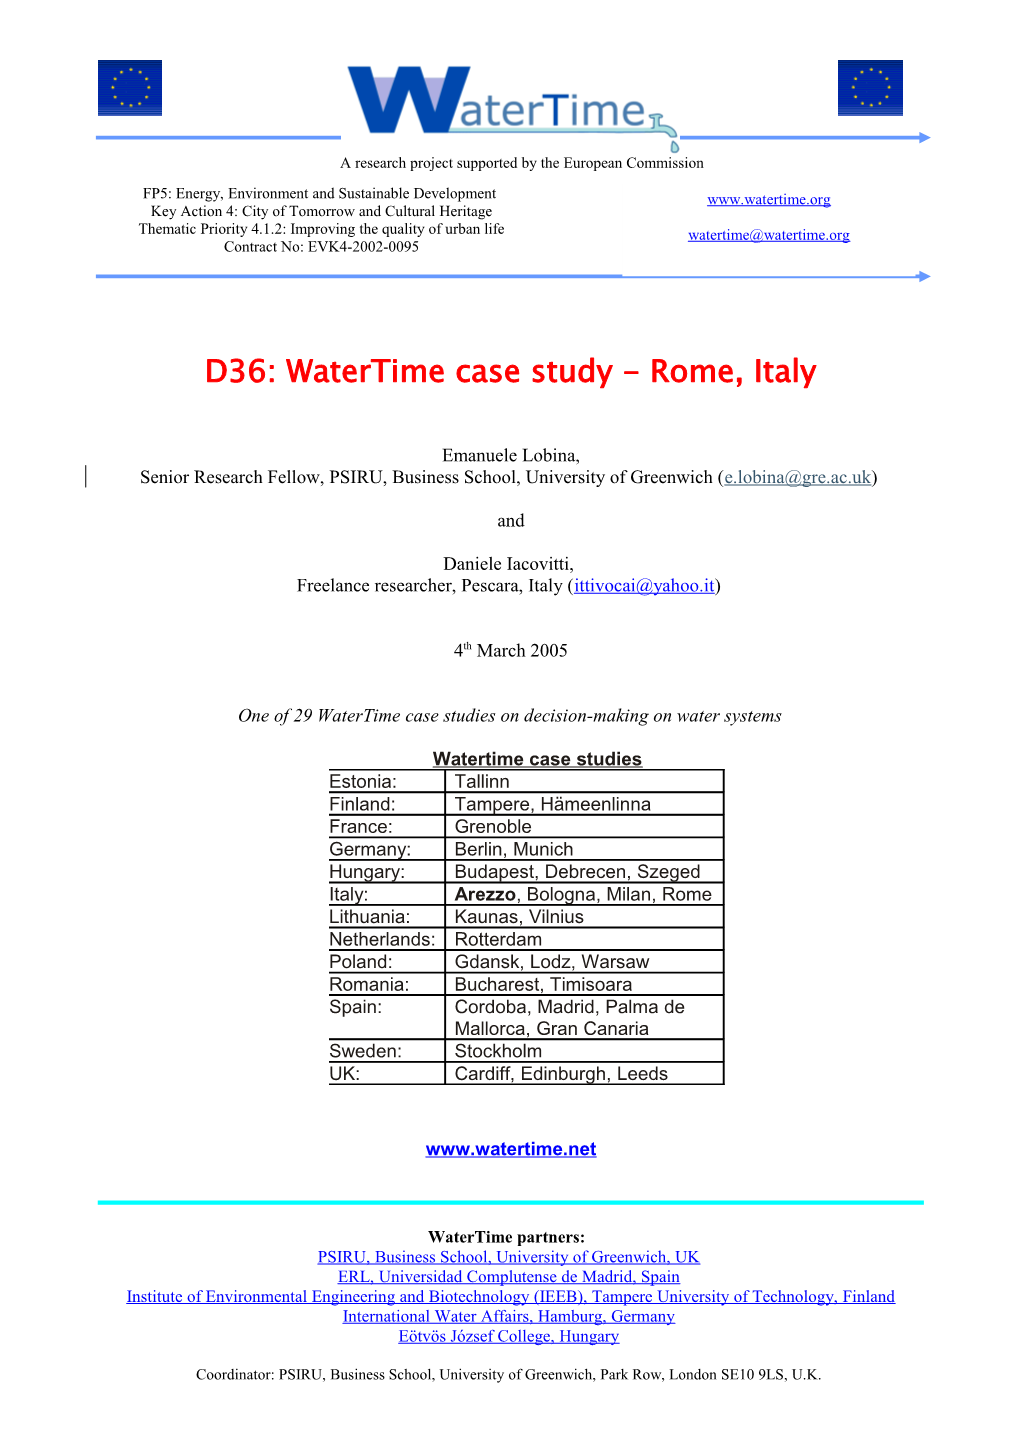 D36: Watertime Case Study - Rome, Italy